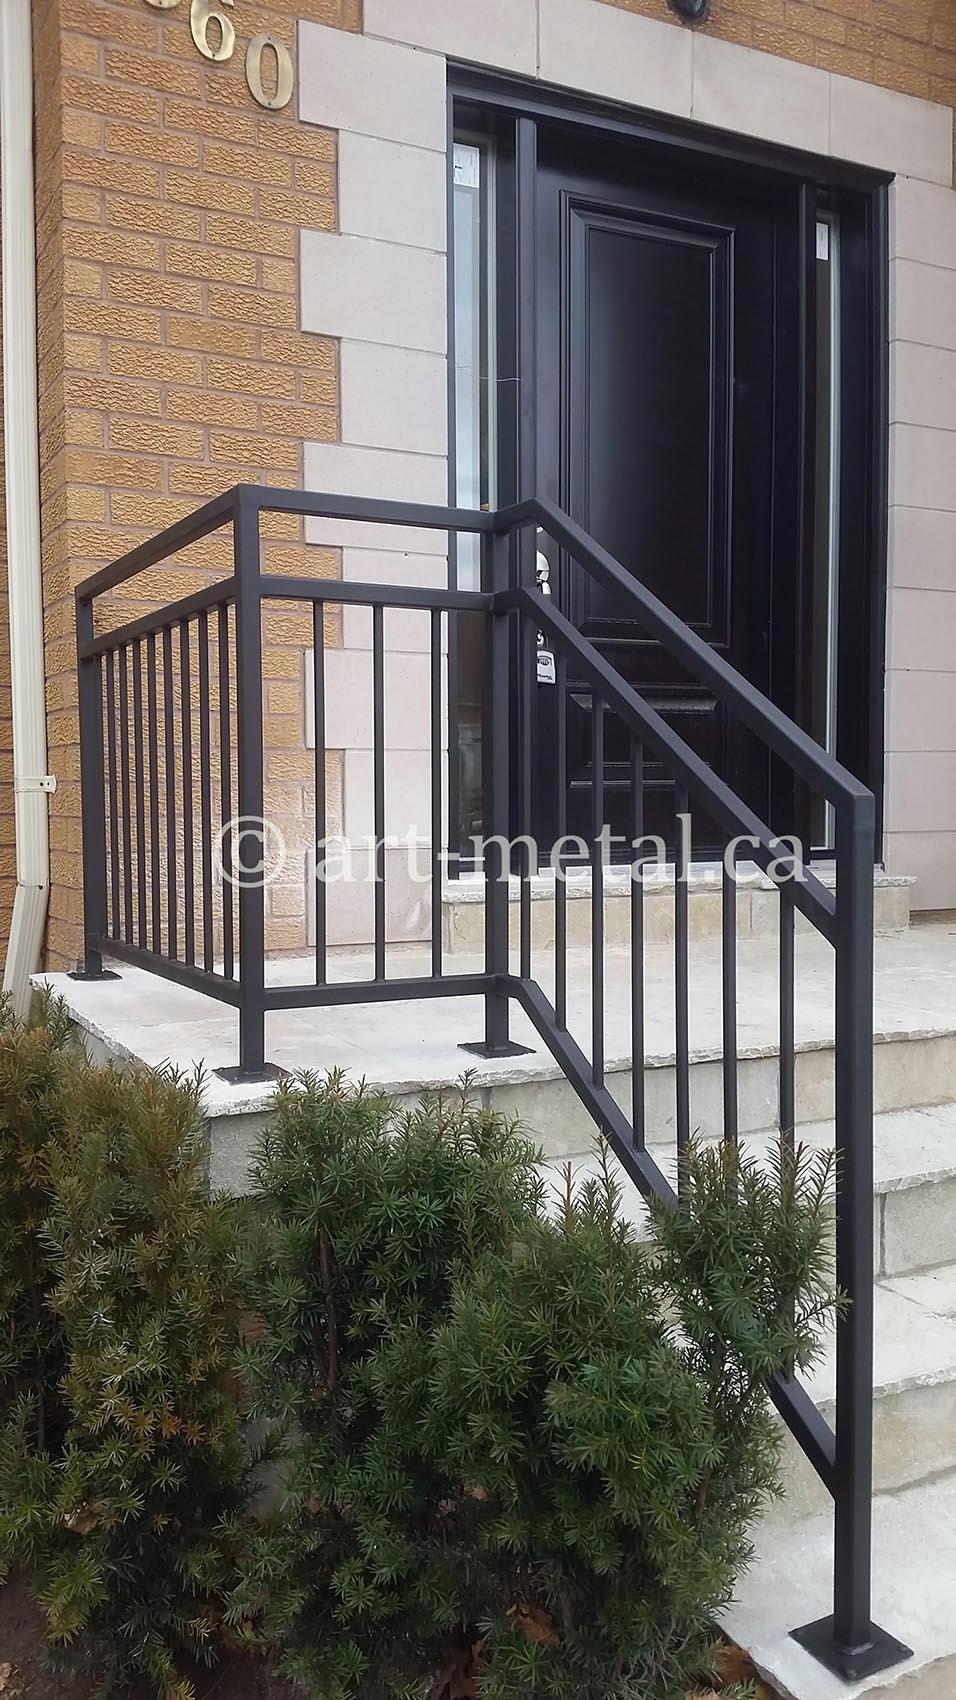 Outdoor Porch Railing Designs from Wood, Wrought Iron, and ...